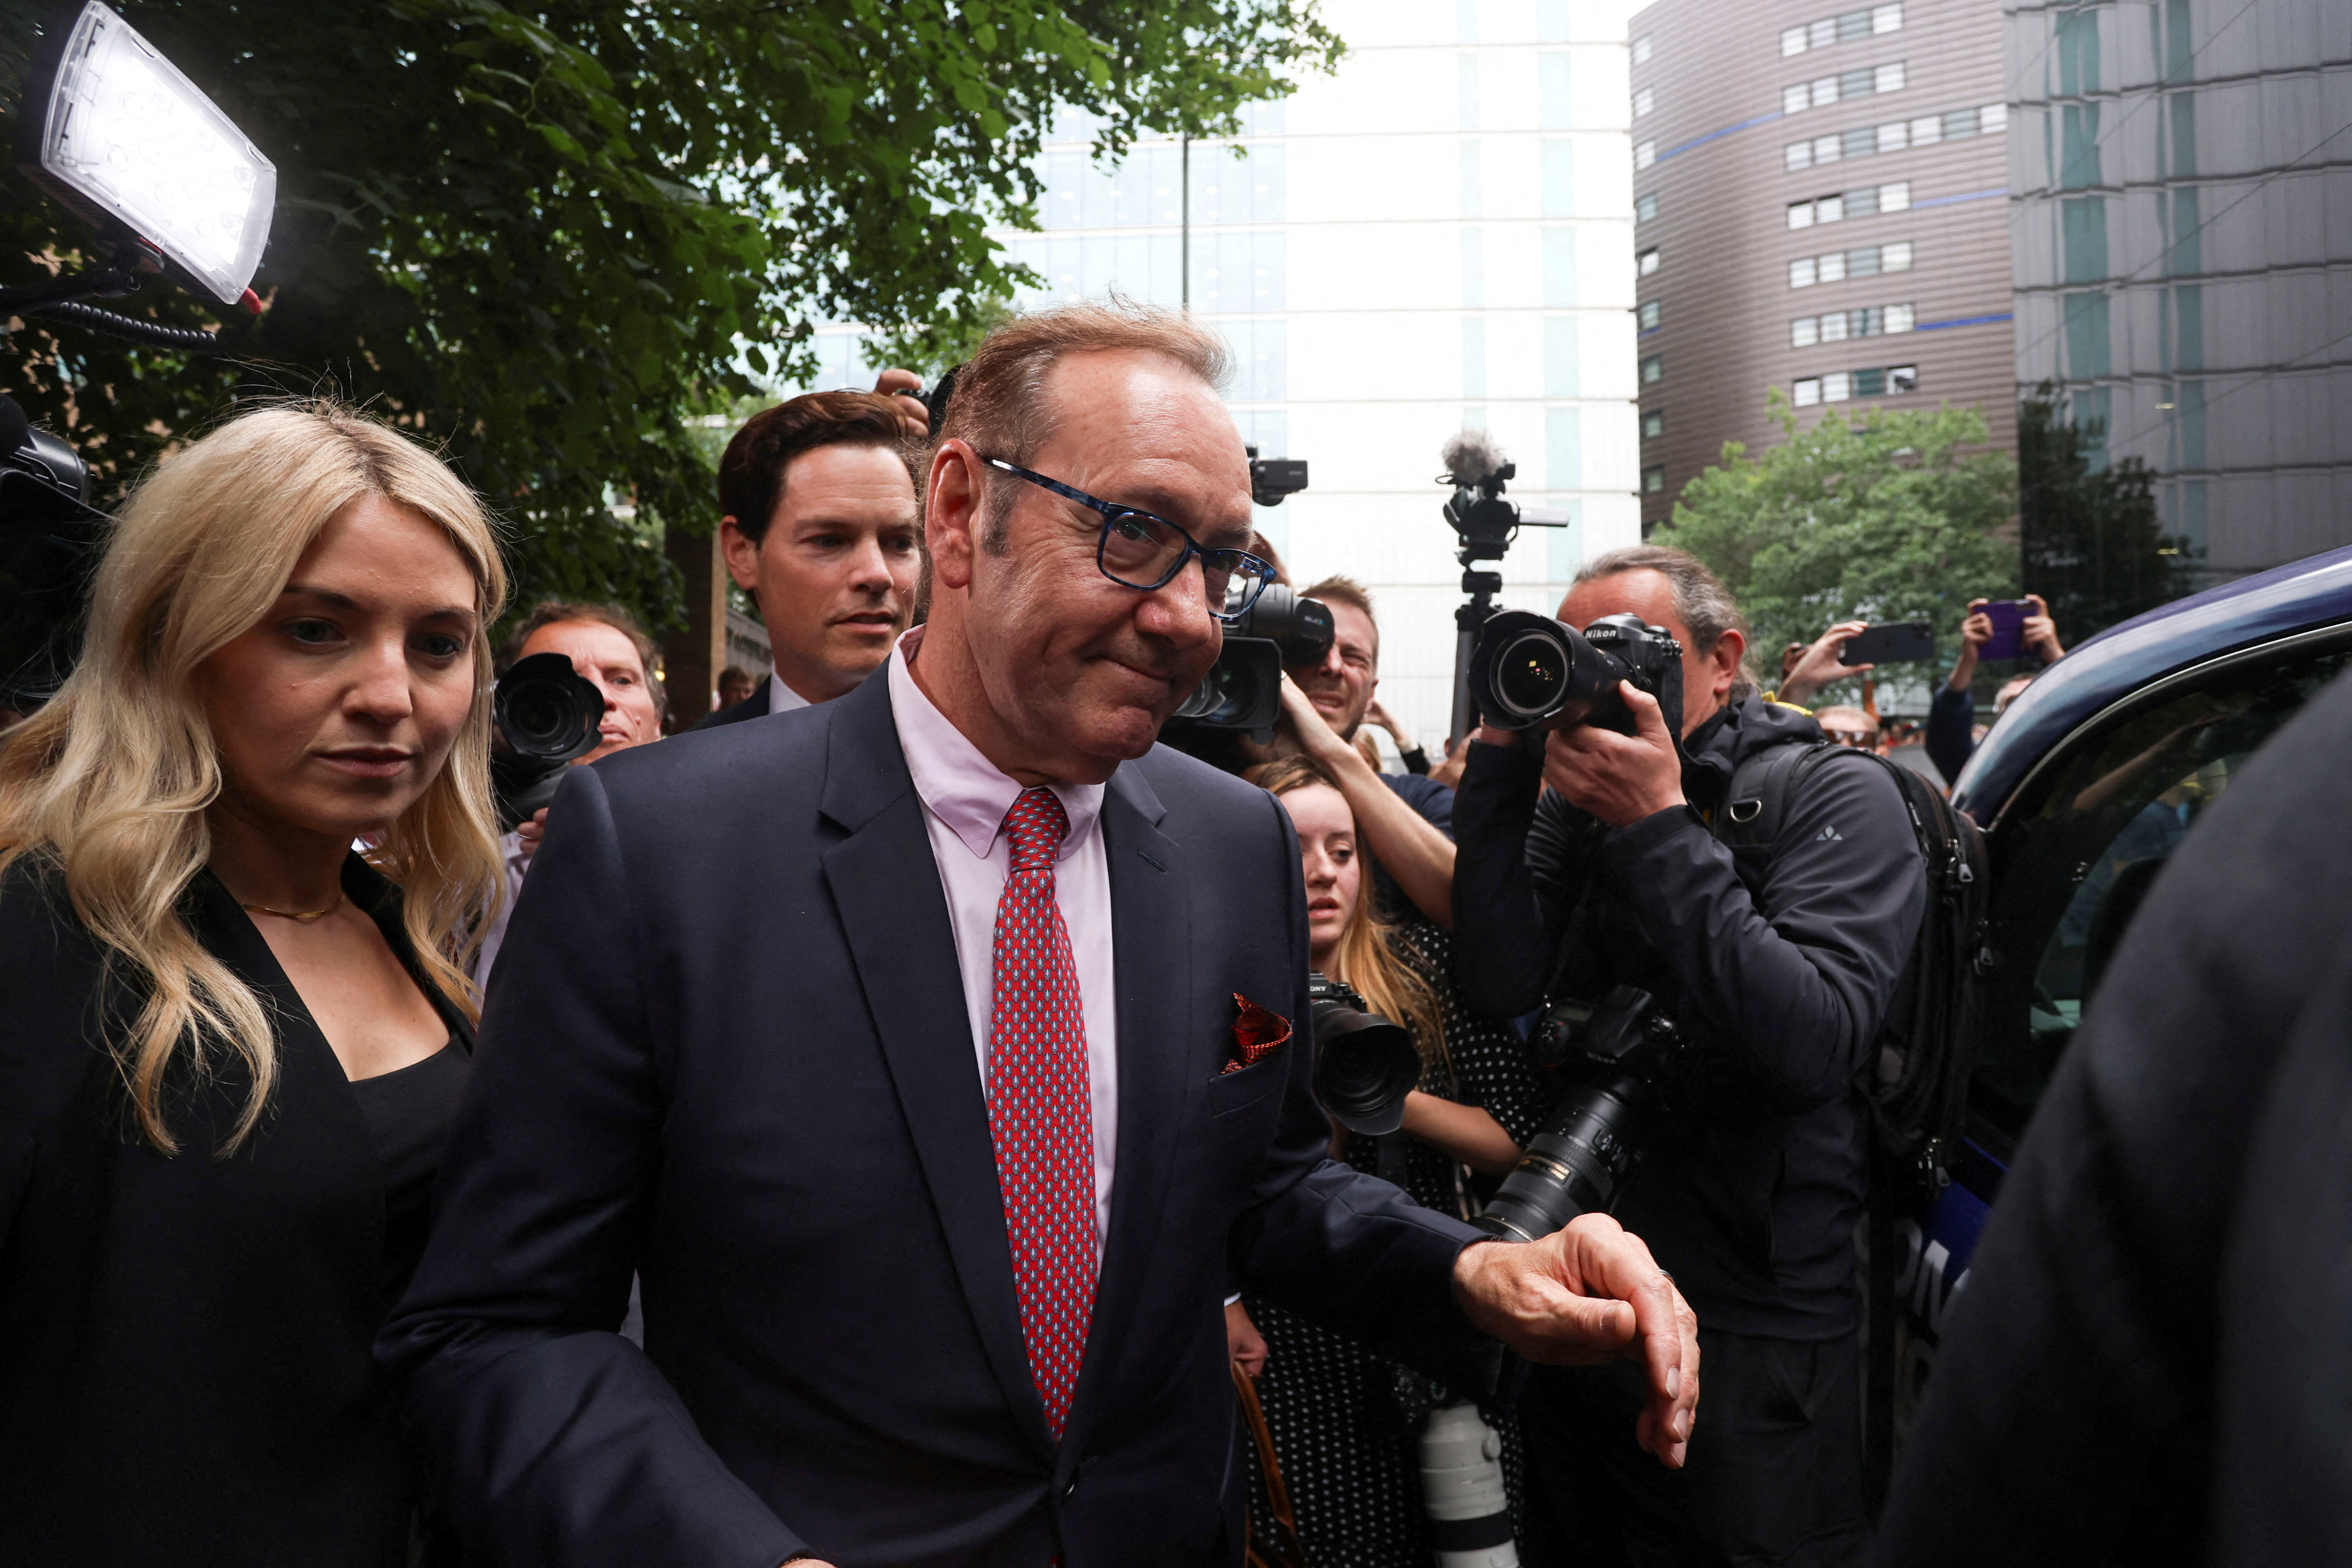 Kevin Spacey acquitted of all nine sexual offence charges in London trial Reuters image